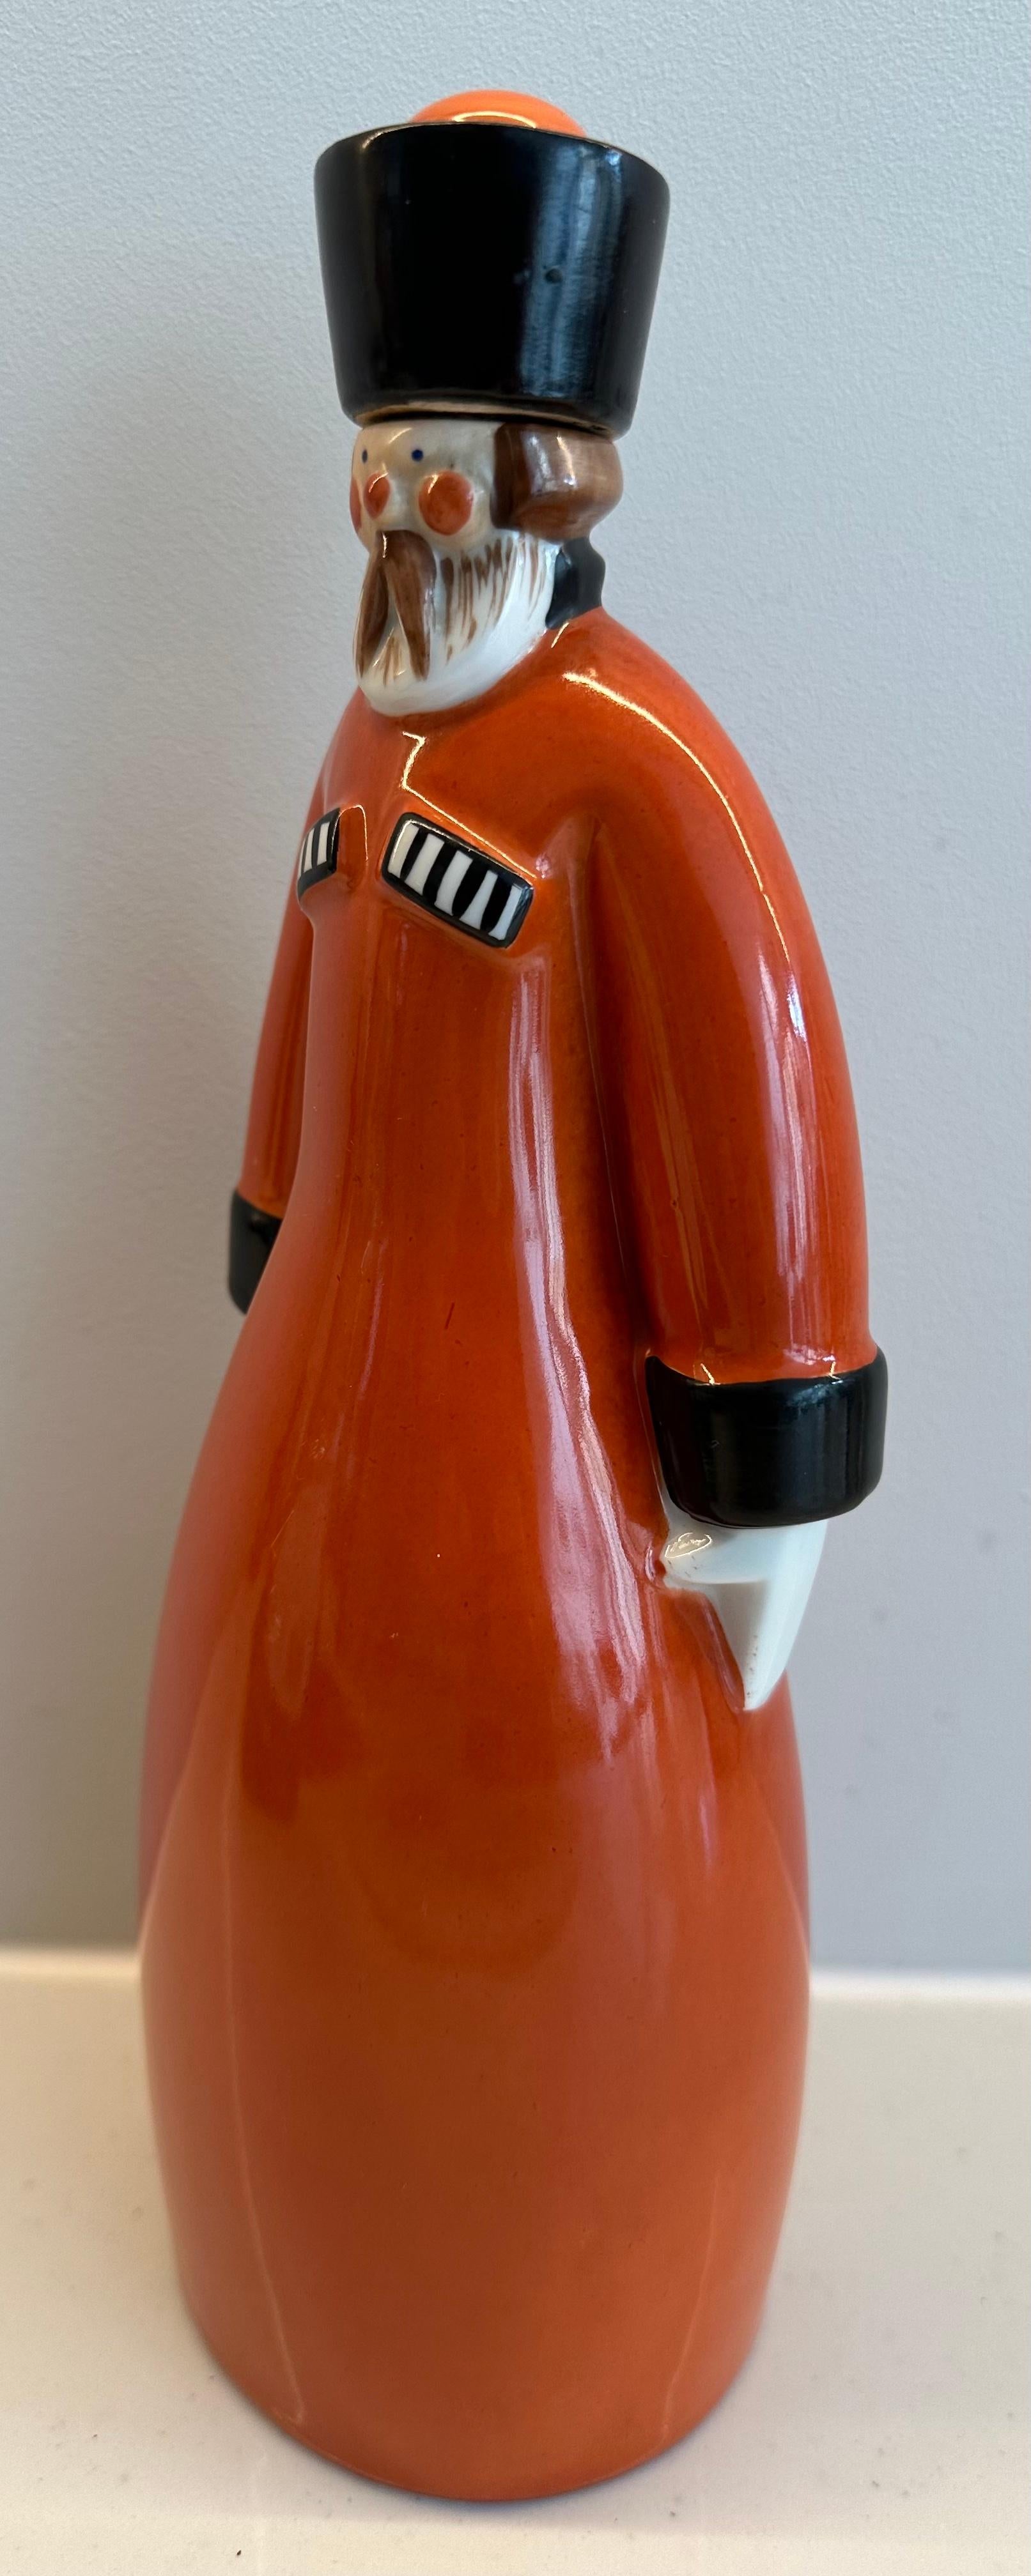 Enameled Art Deco 1930s French “Curacao” Figural Russian Soldier Flask by Robj Paris For Sale